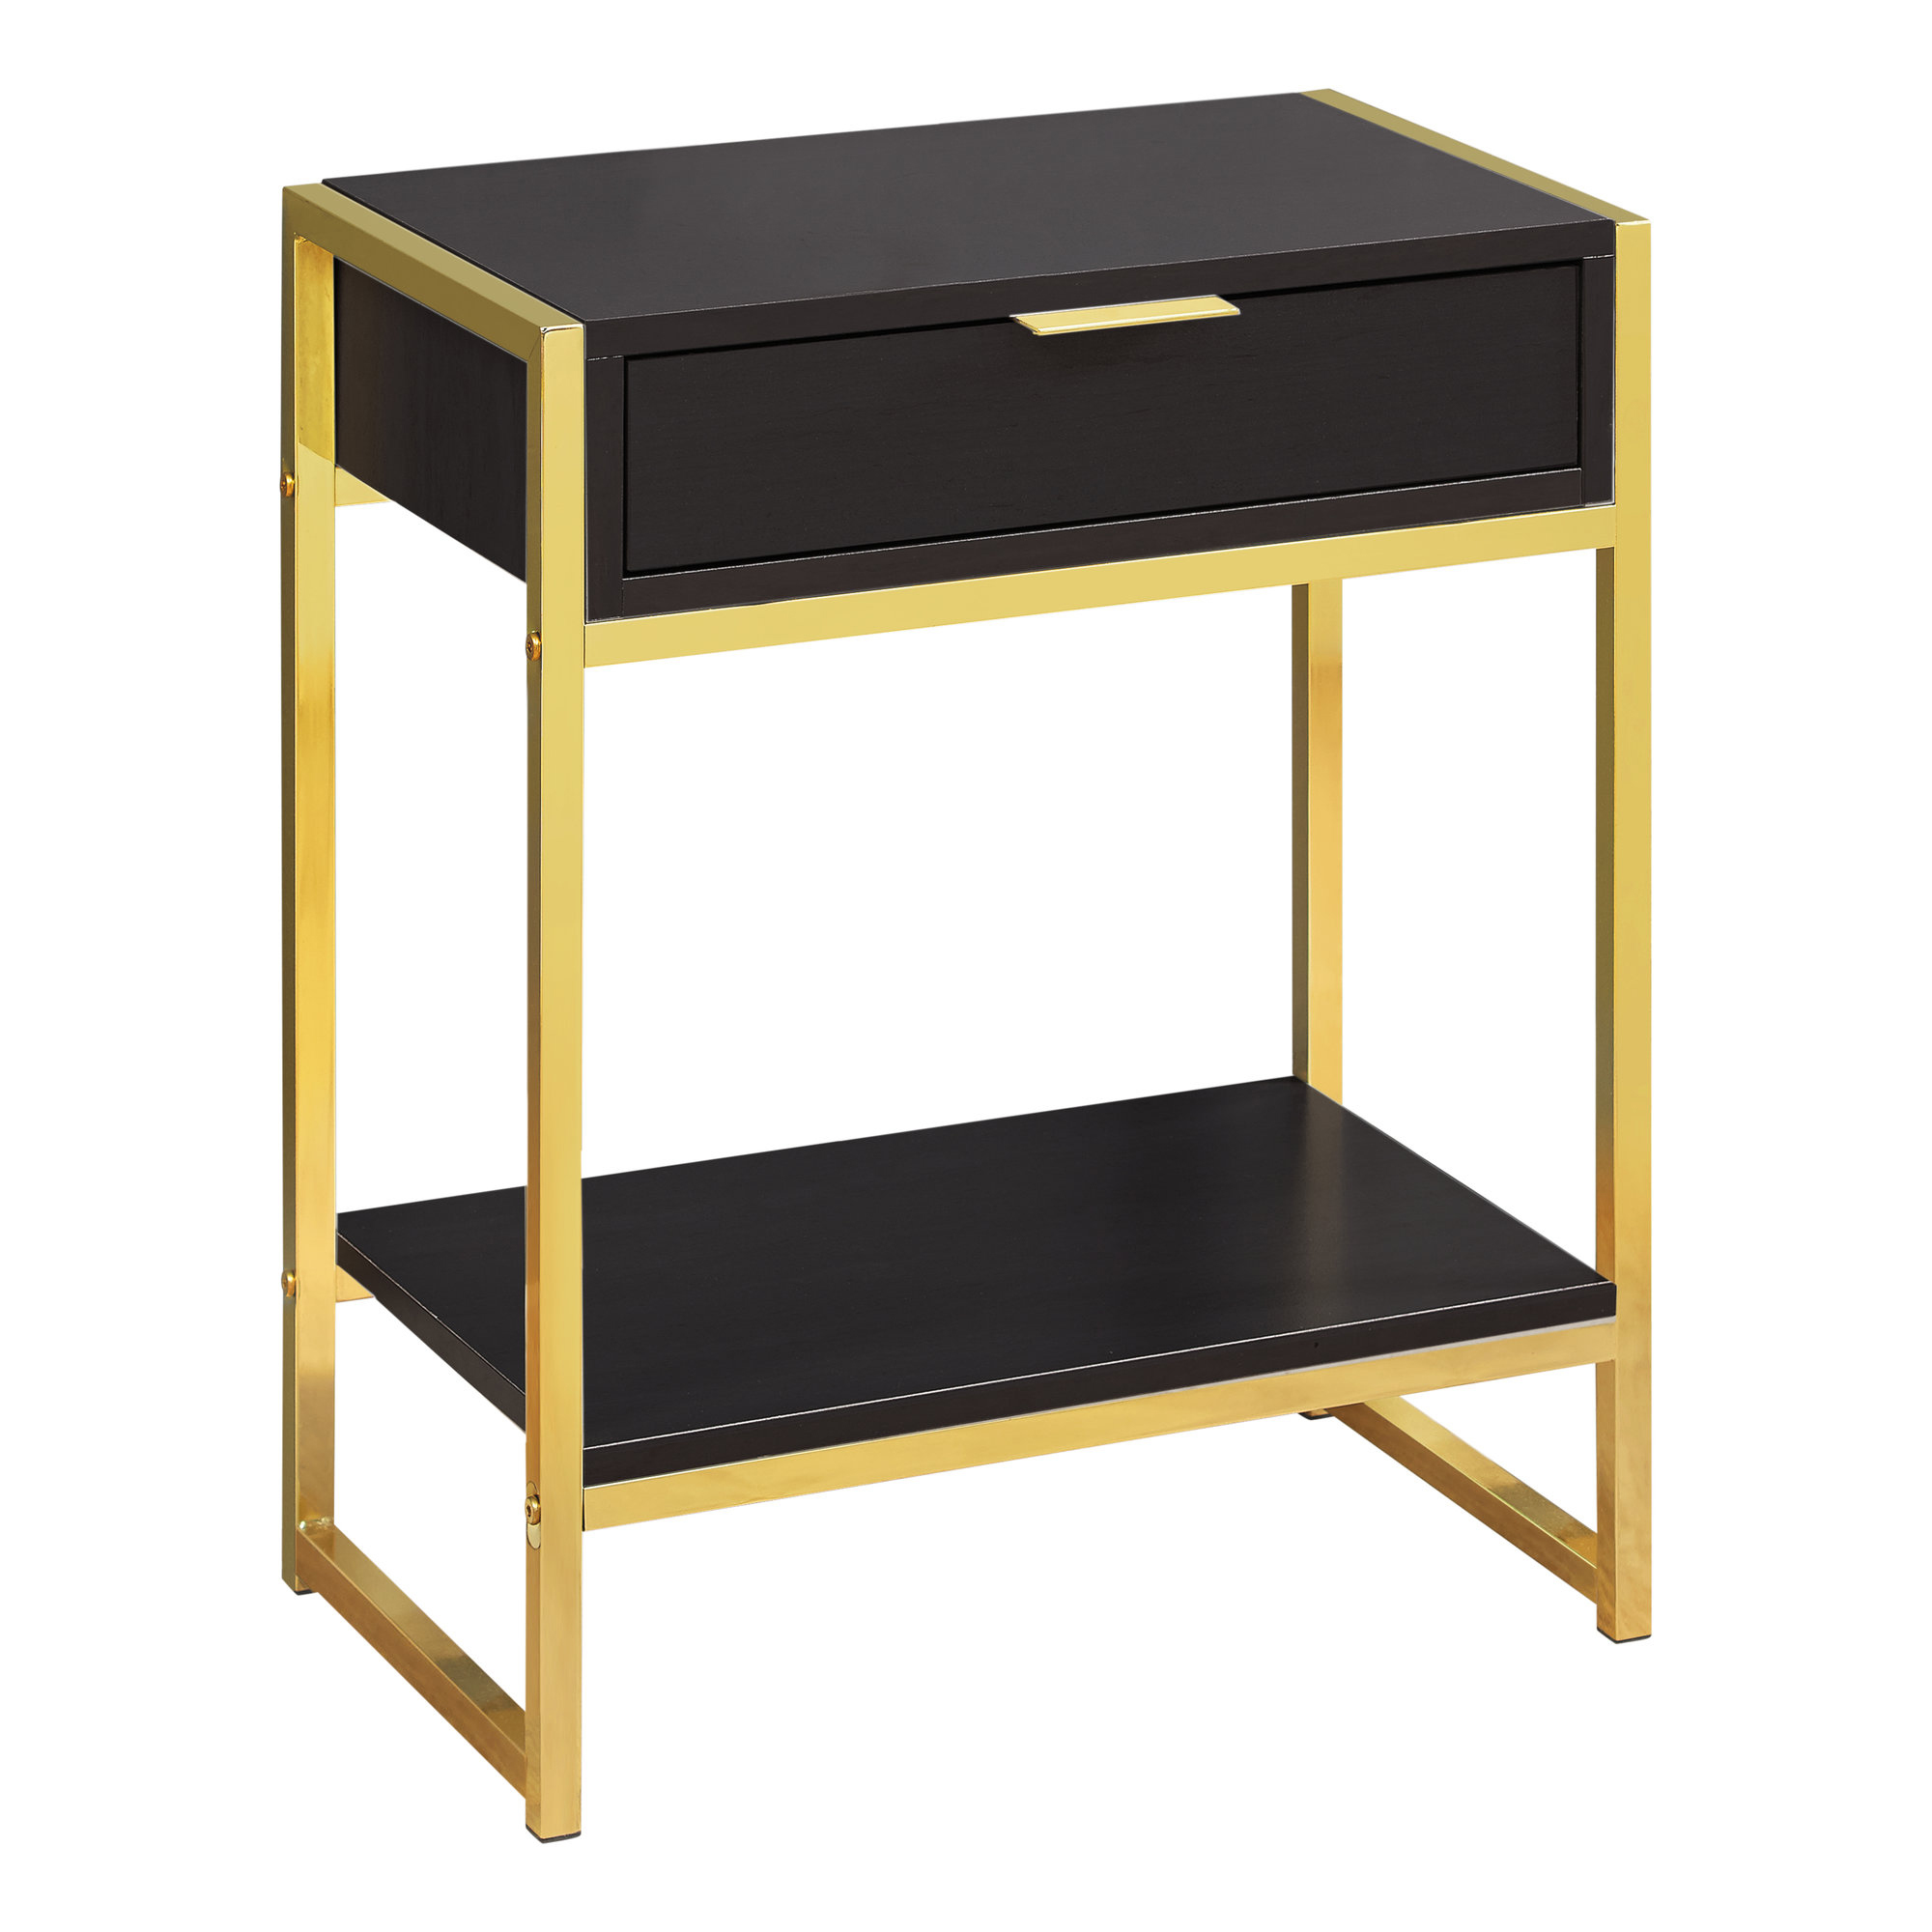 ACCENT TABLE - 24"H / CAPPUCCINO / GOLD METAL